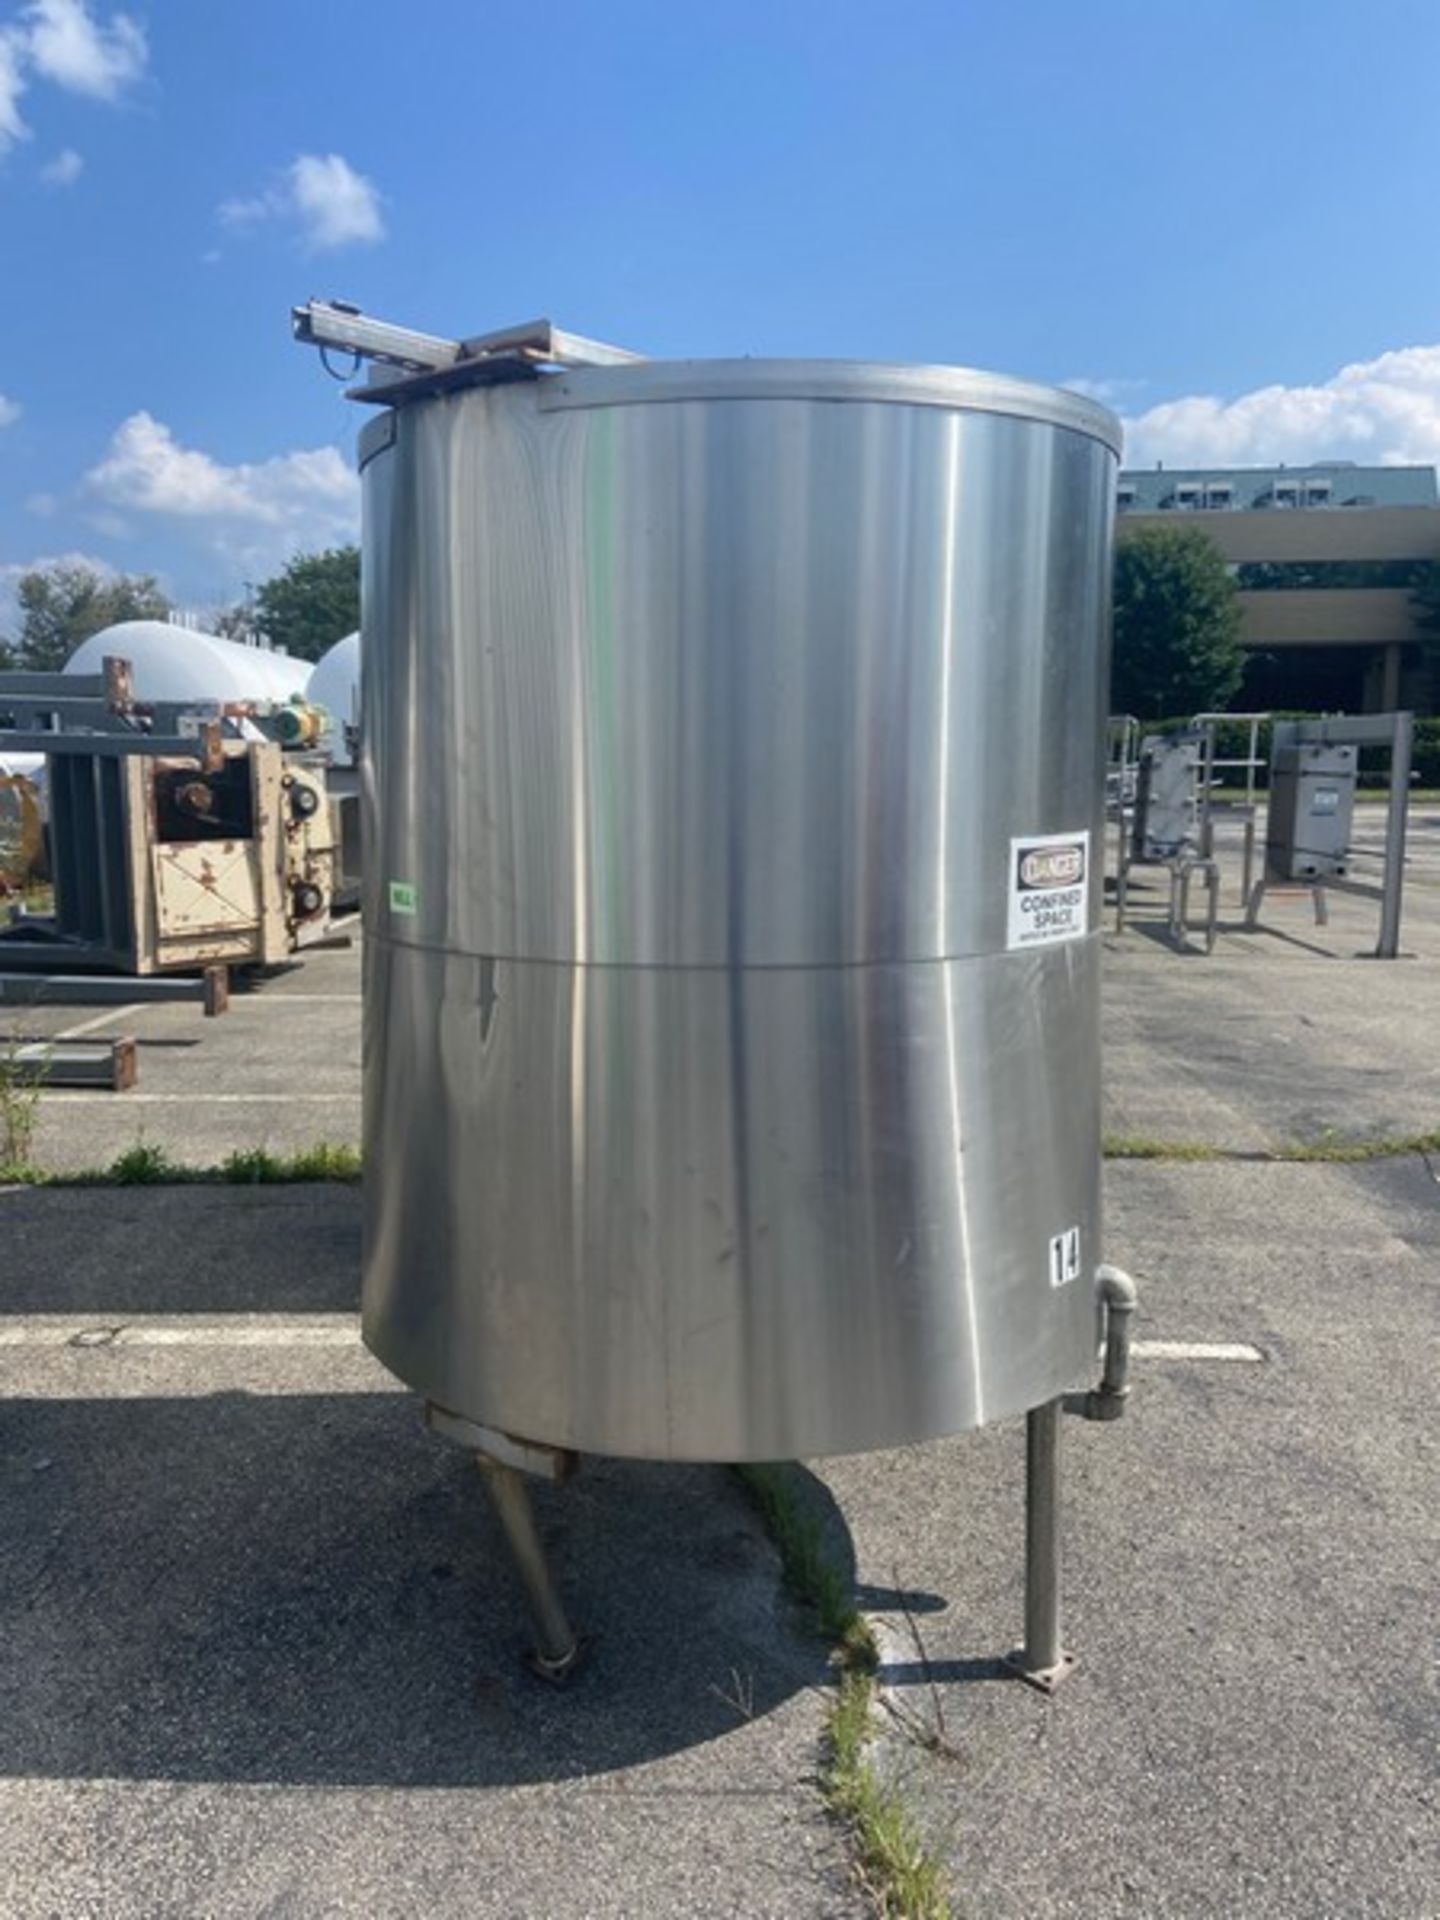 Aprox. 500 Gal. S/S Jacketed Tank, Internal Dims.: Aprox. 62” L x 49” Dia., Mounted on S/S Legs (15) - Image 2 of 7